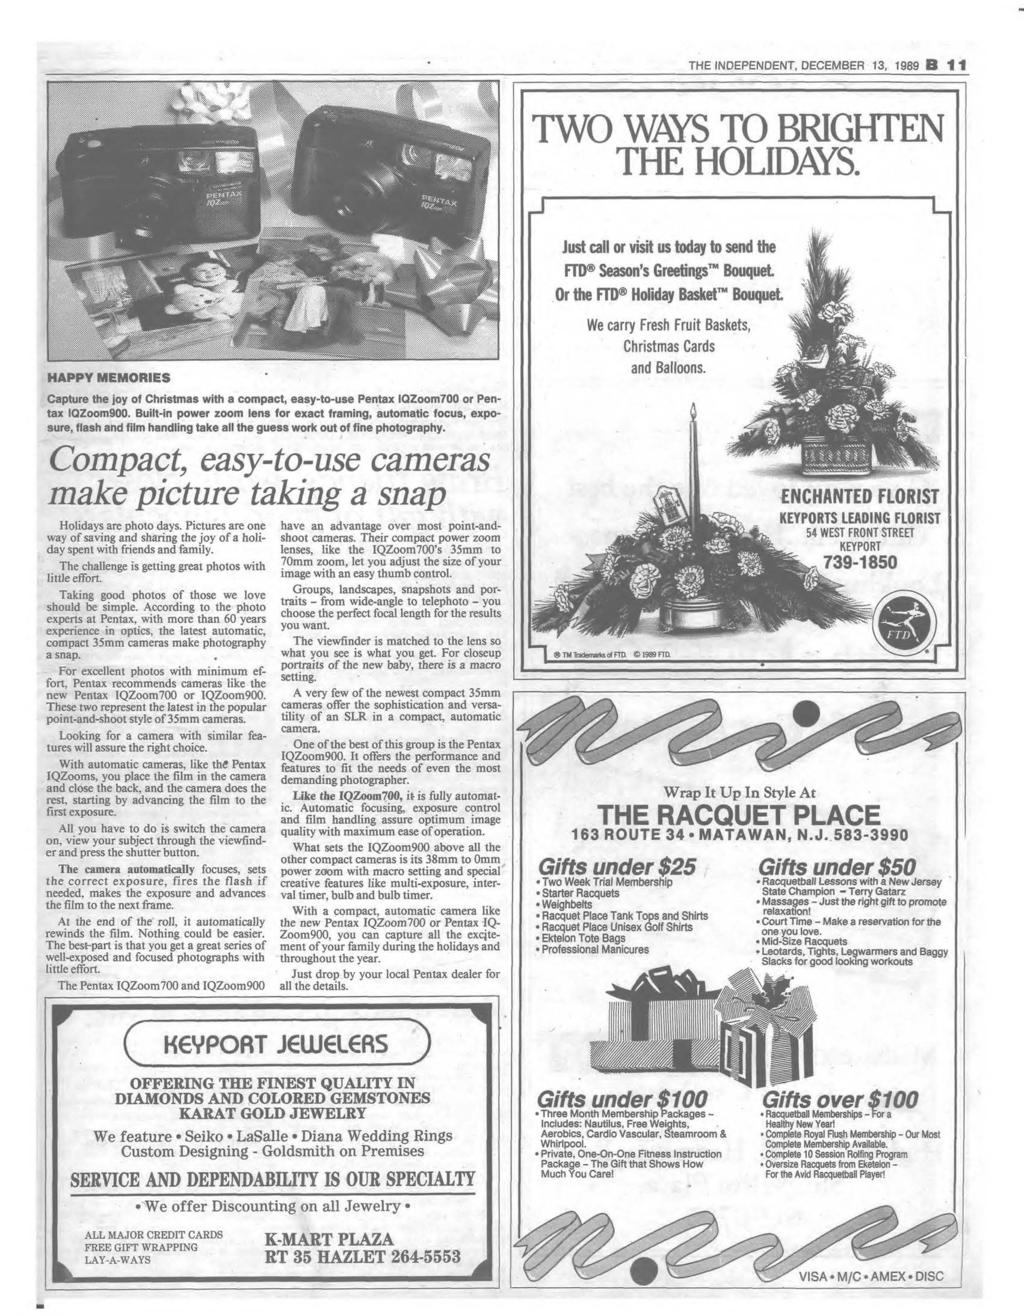 THE INDEPENDENT, DECEM BER 13, 1989 B 1 1 TWO WAYS TO BRIGHTEN THE HOLIDAYS.